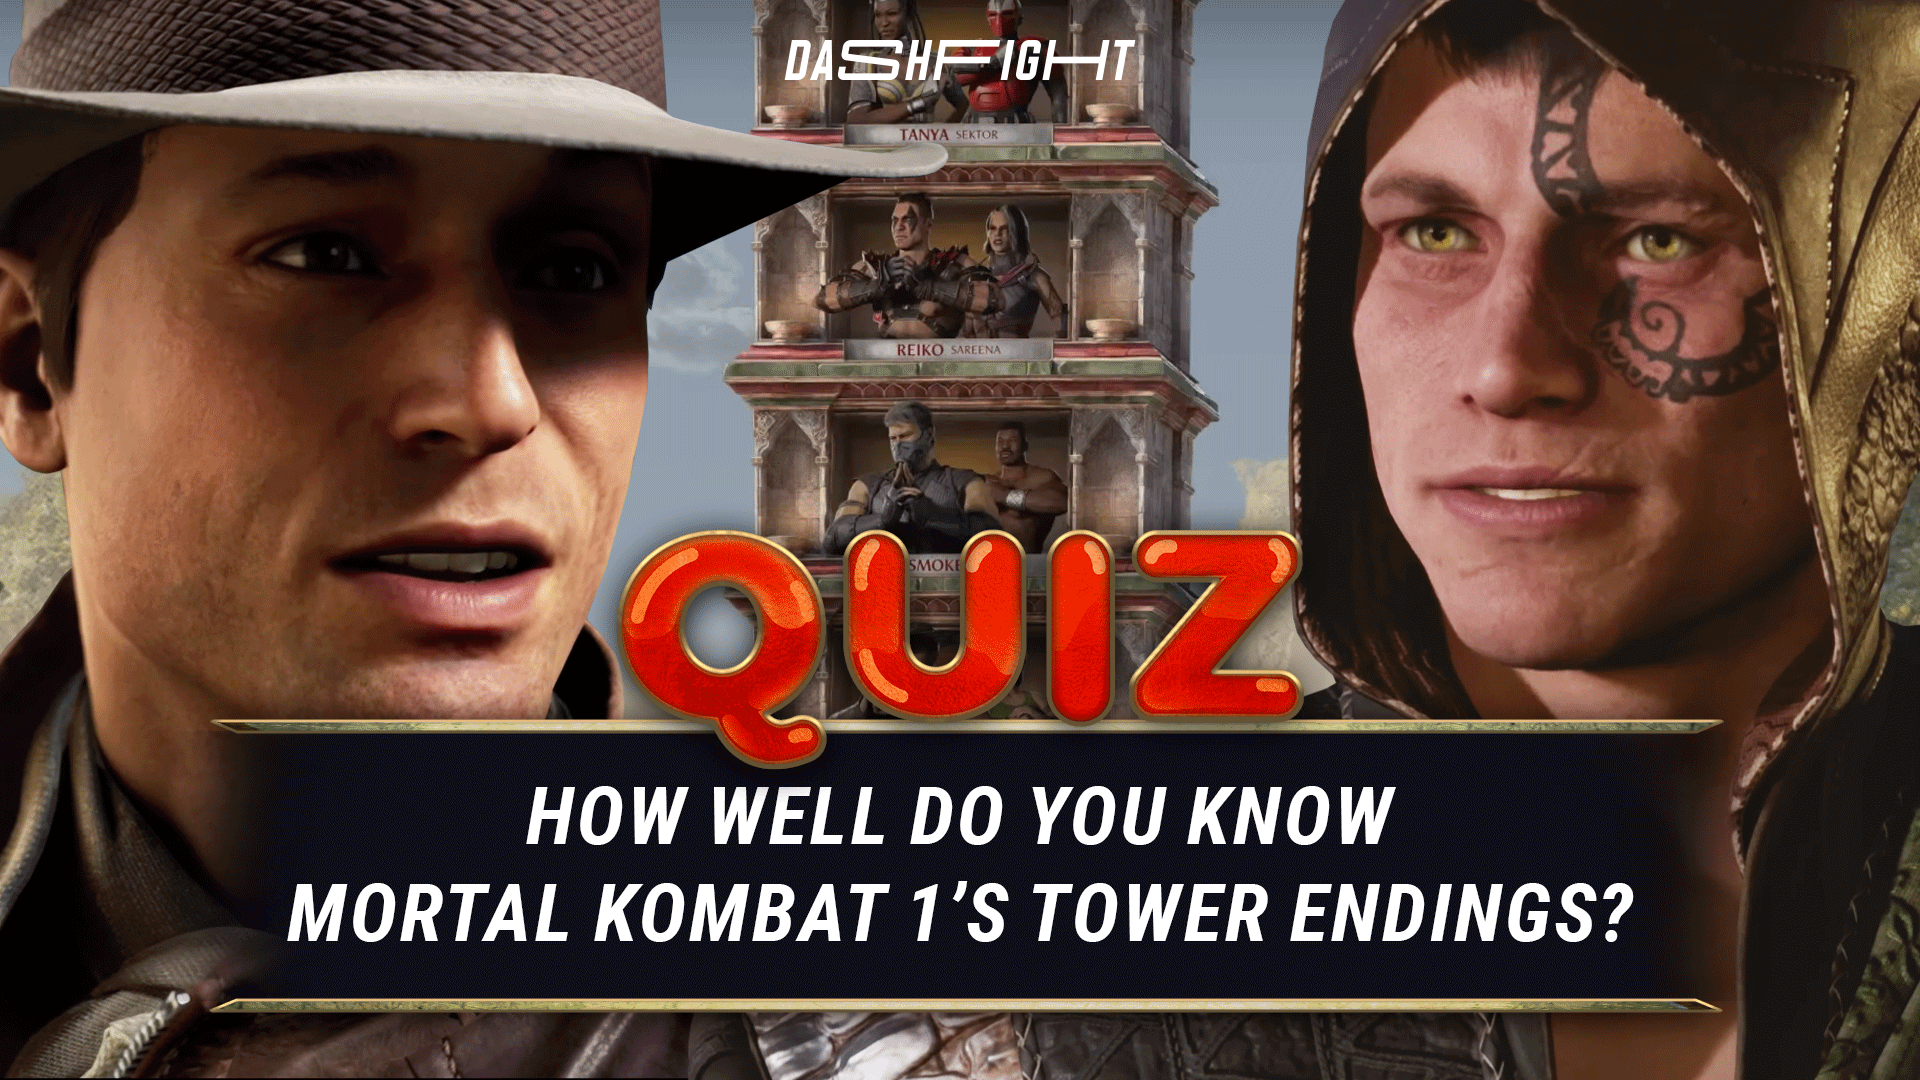 How Well do You Know Mortal Kombat 1's Tower Endings?